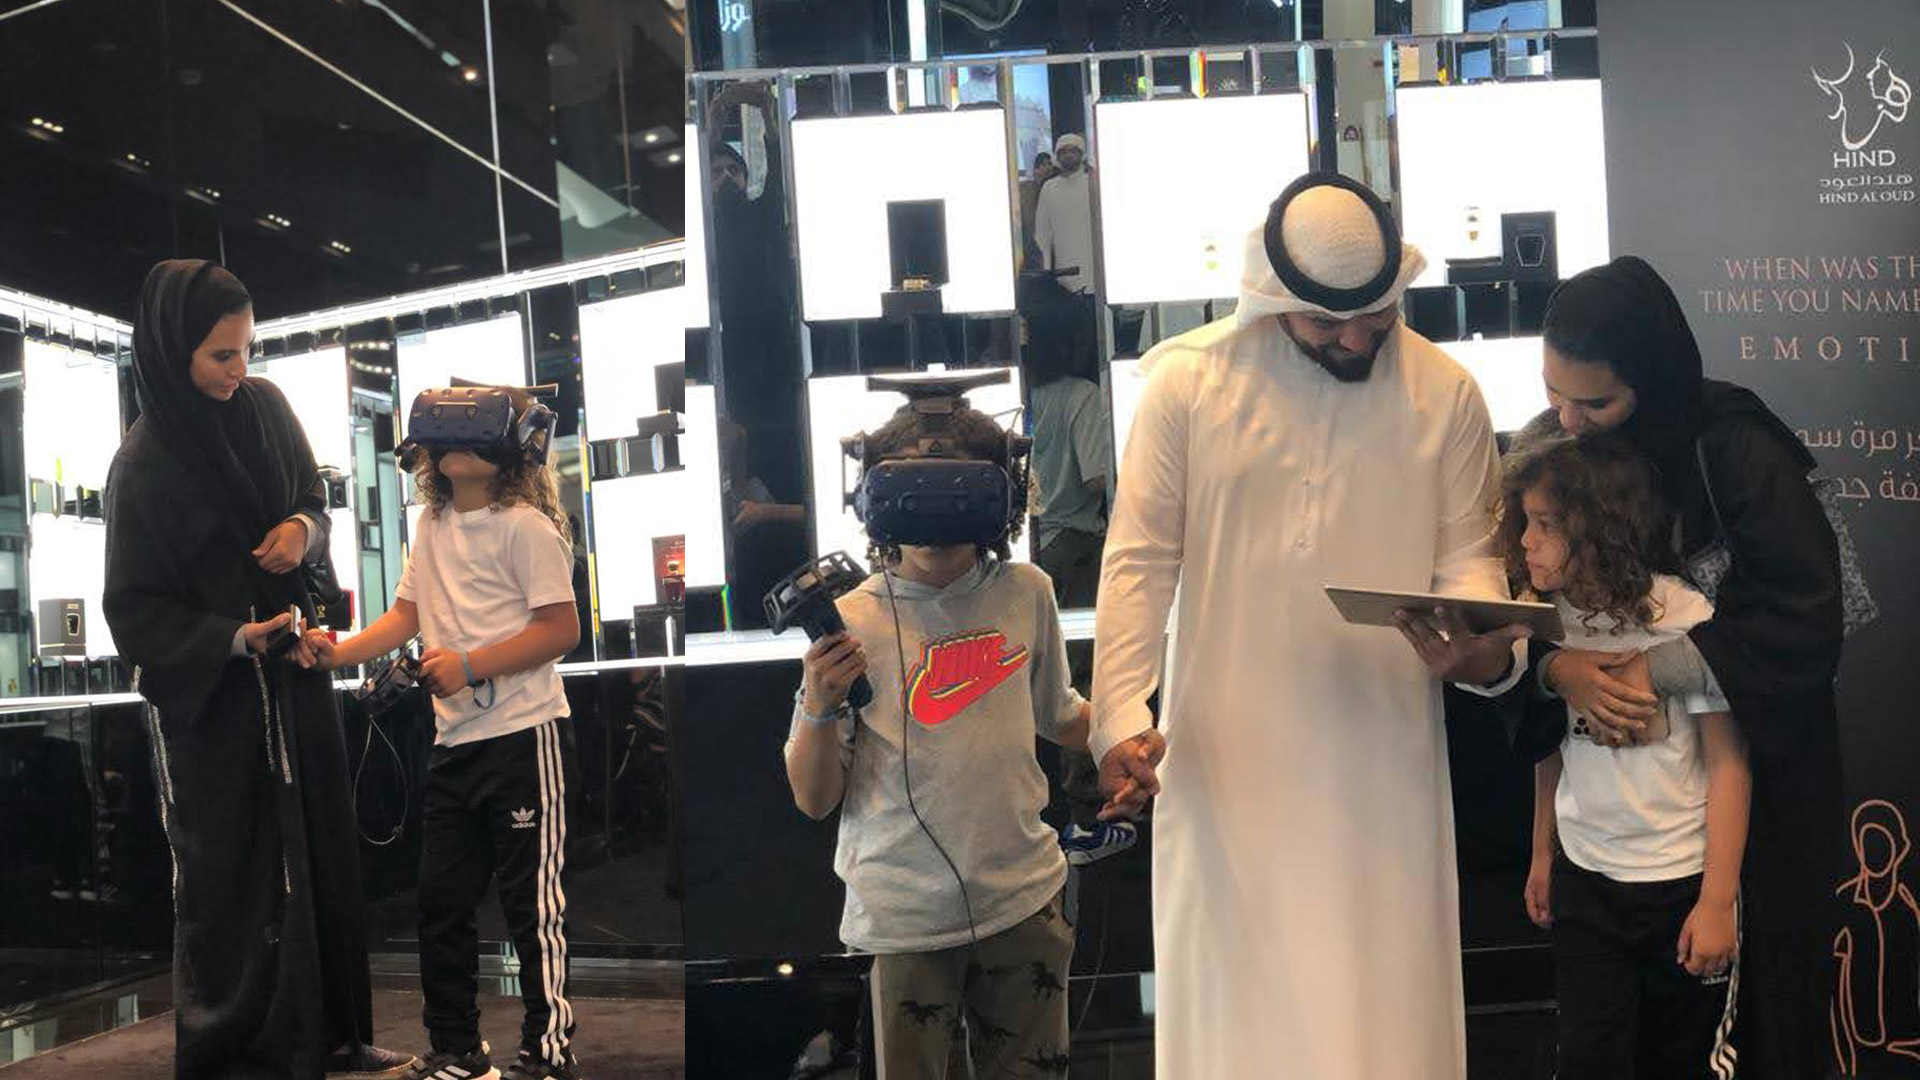 Naming New Emotions VR - Hind Al Oud collaboration. Tailored for kids aged 7 to 12. Explore parental love in immersive experience.